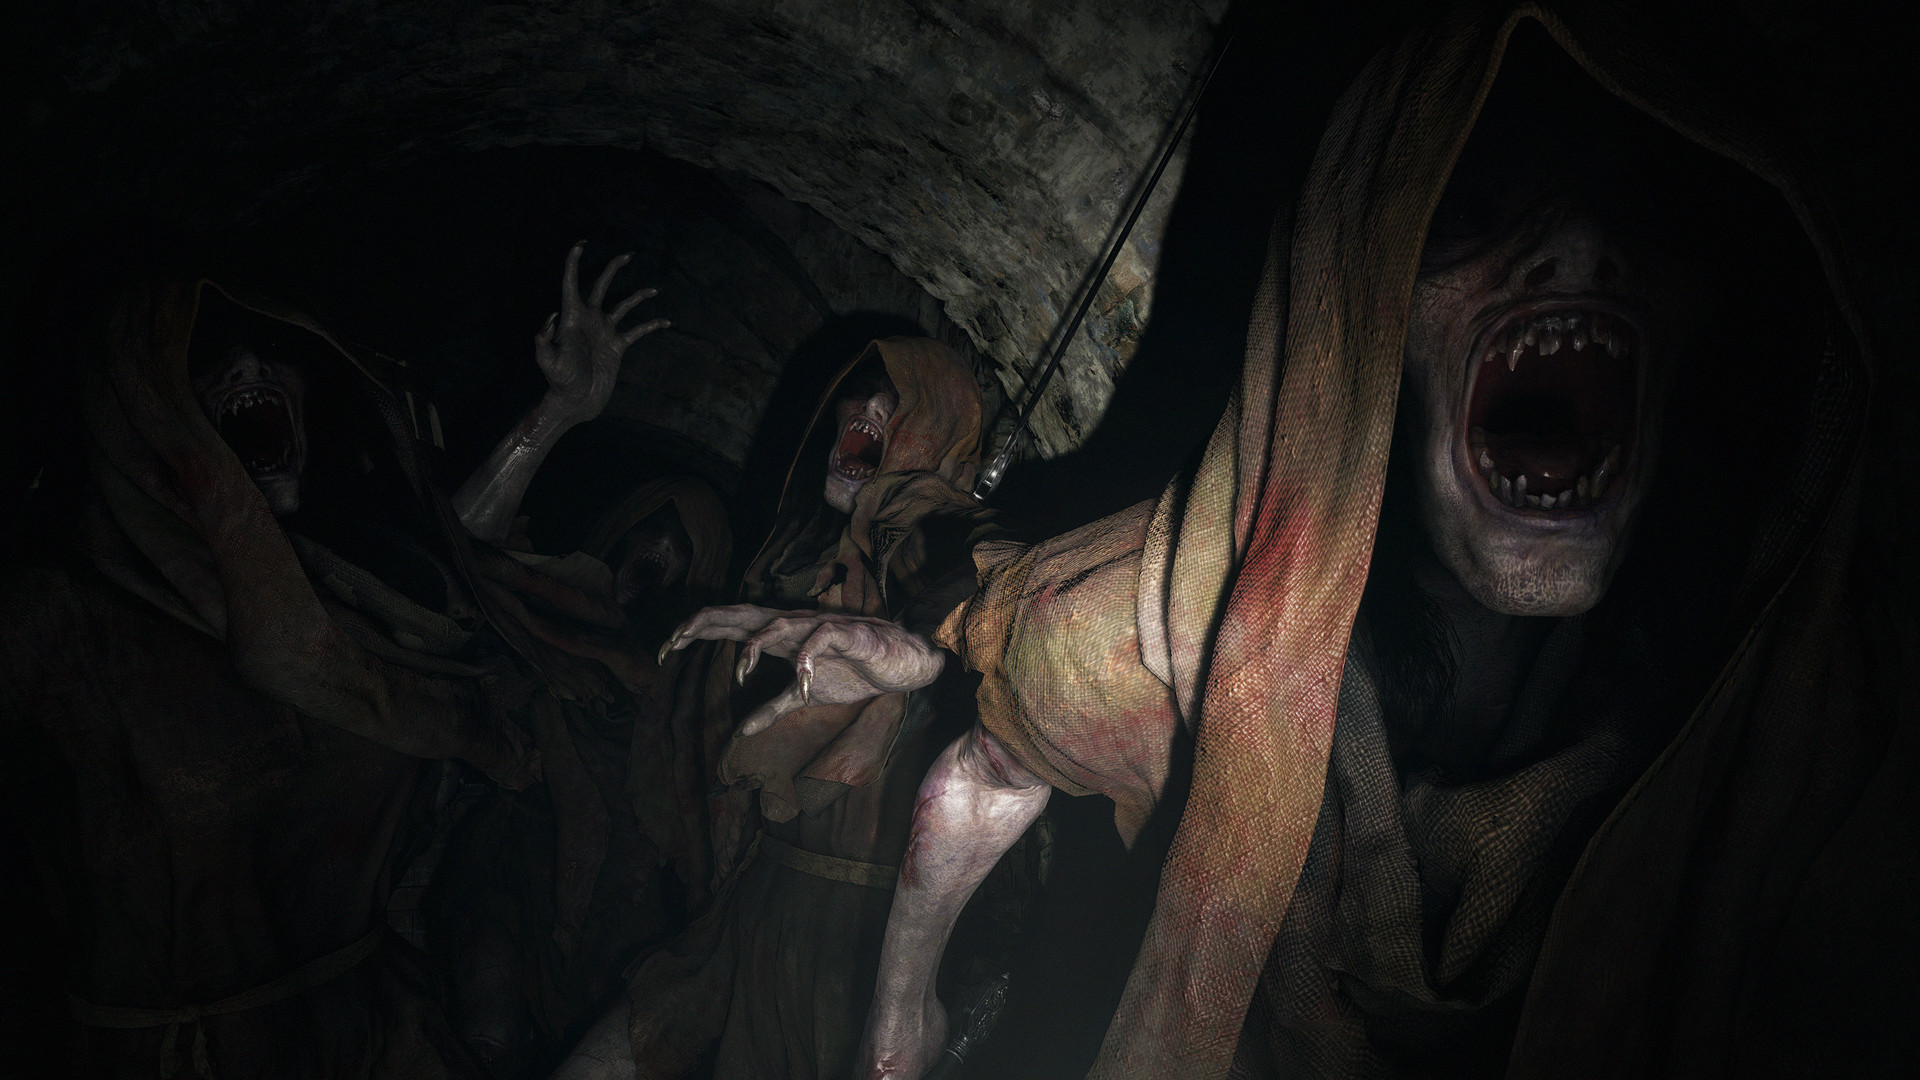 A screenshot from the video game Resident Evil Village showing undead monsters in cloaks in a dark underground dungeon.